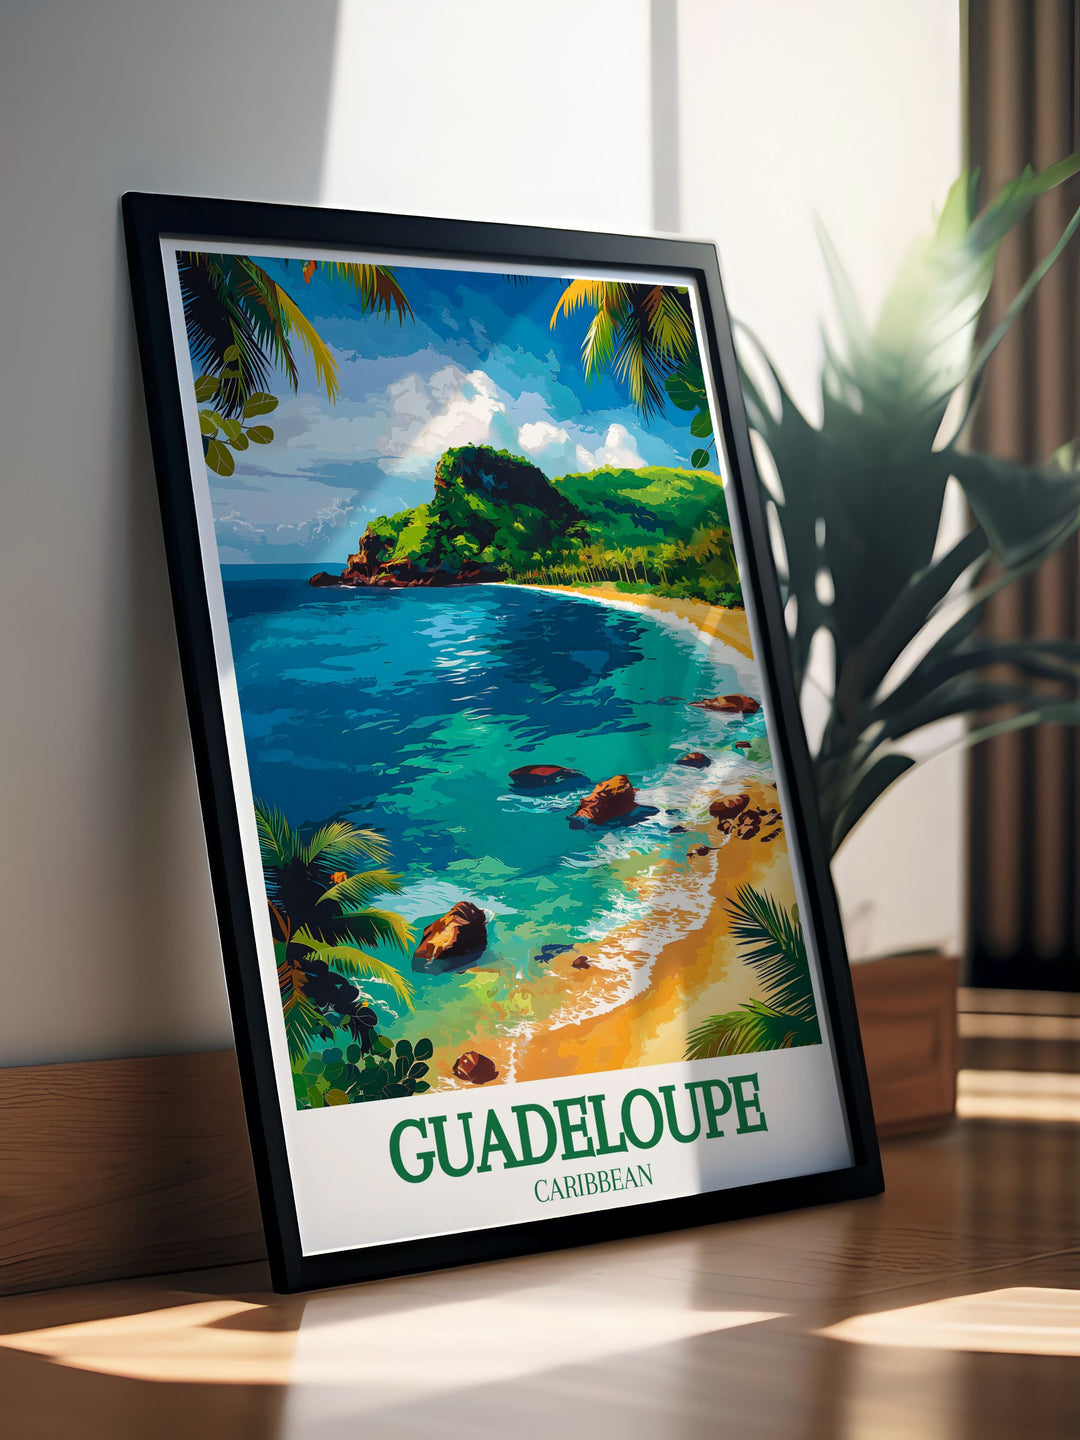 Showcasing the serene beauty of Grand Anse Beach, this poster captures the tranquil waters and endless shoreline of one of the Caribbeans most beautiful beaches. Ideal for those who dream of tropical escapes, this artwork brings a touch of paradise to your home.